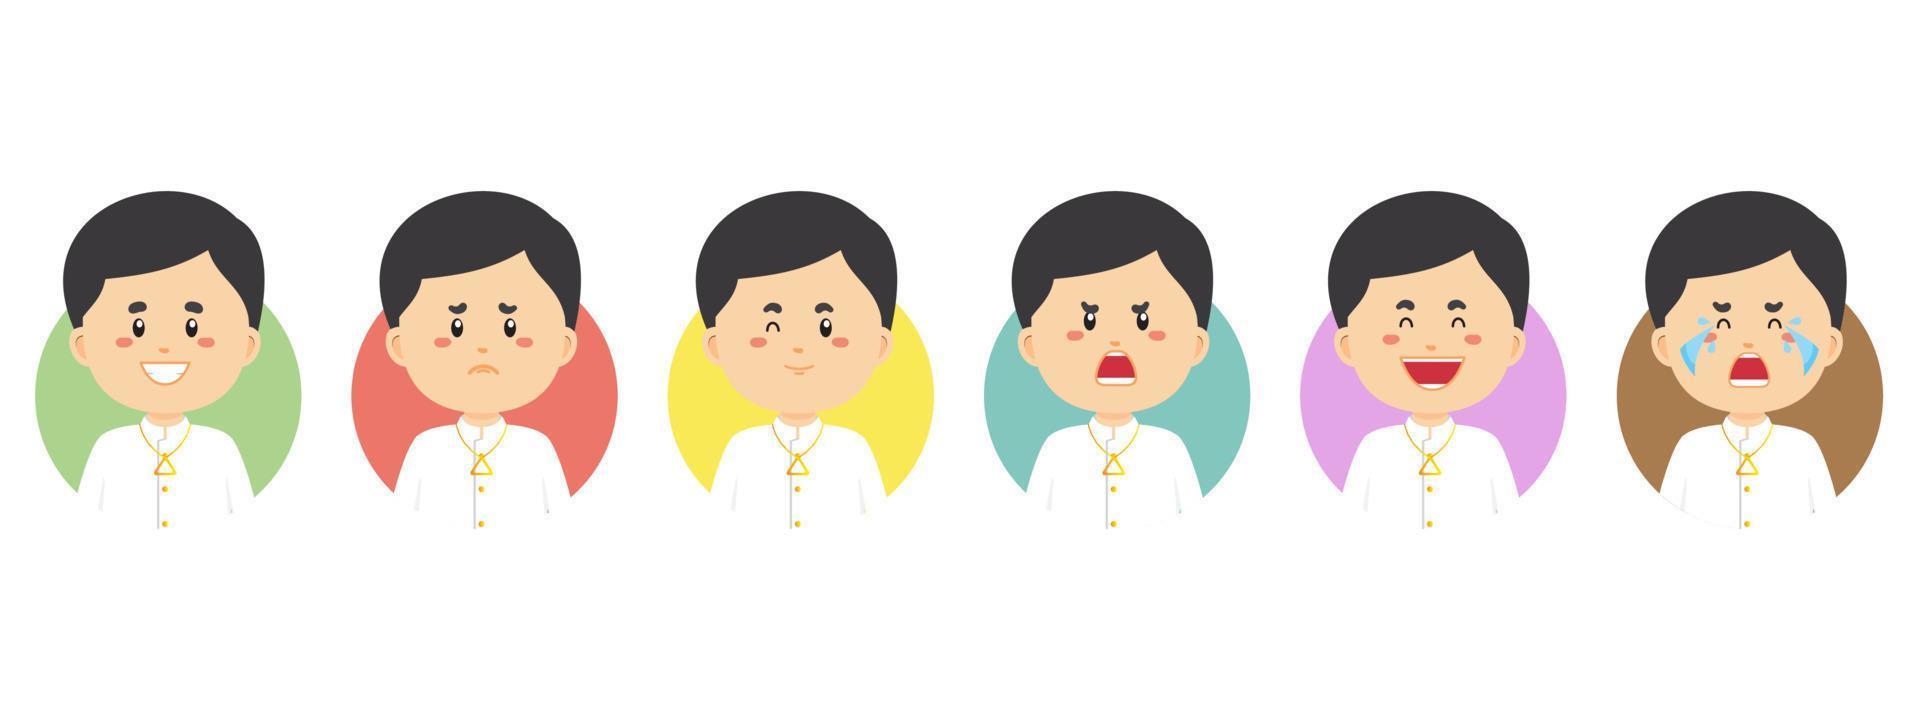 Laos Avatar with Various Expression vector